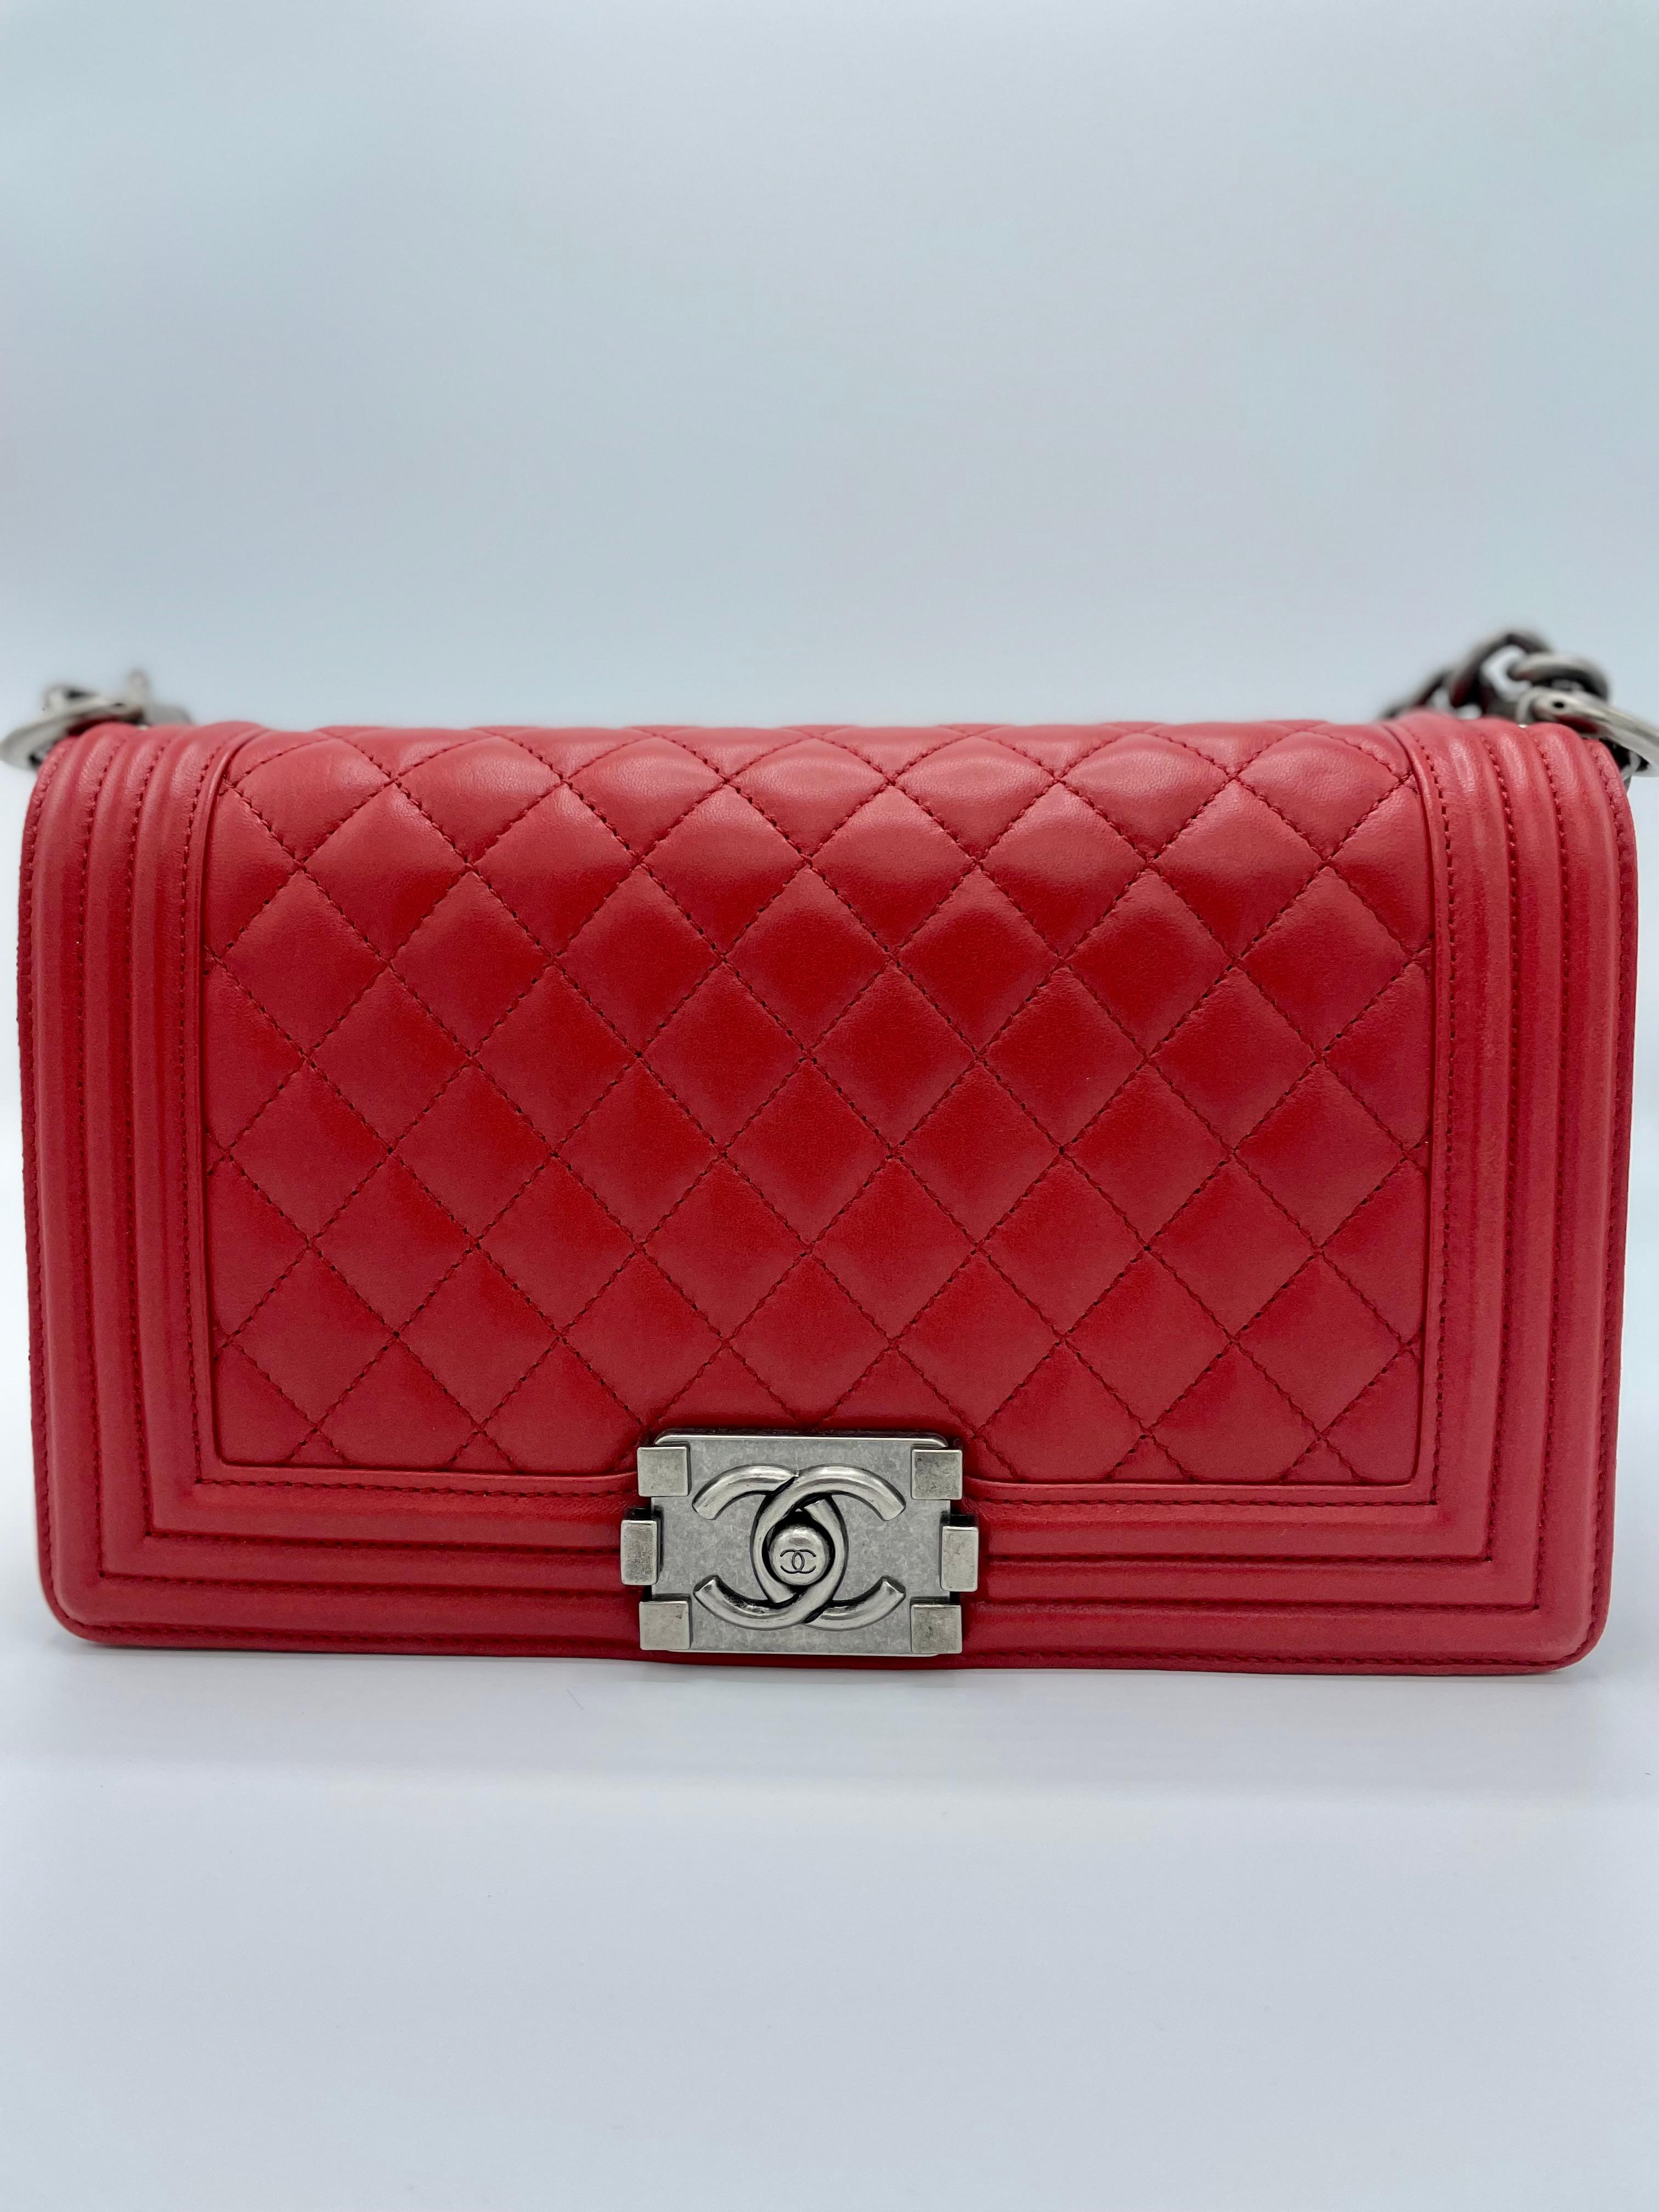 Chanel Quilted Lambskin Boy Flap Bag Red. In perfect condition. This 2014-2015 version has a leather and chain-link shoulder strap with an adjustable buckle, a push-lock closing, and an inside slide pocket surrounded by silver hardware. This medium